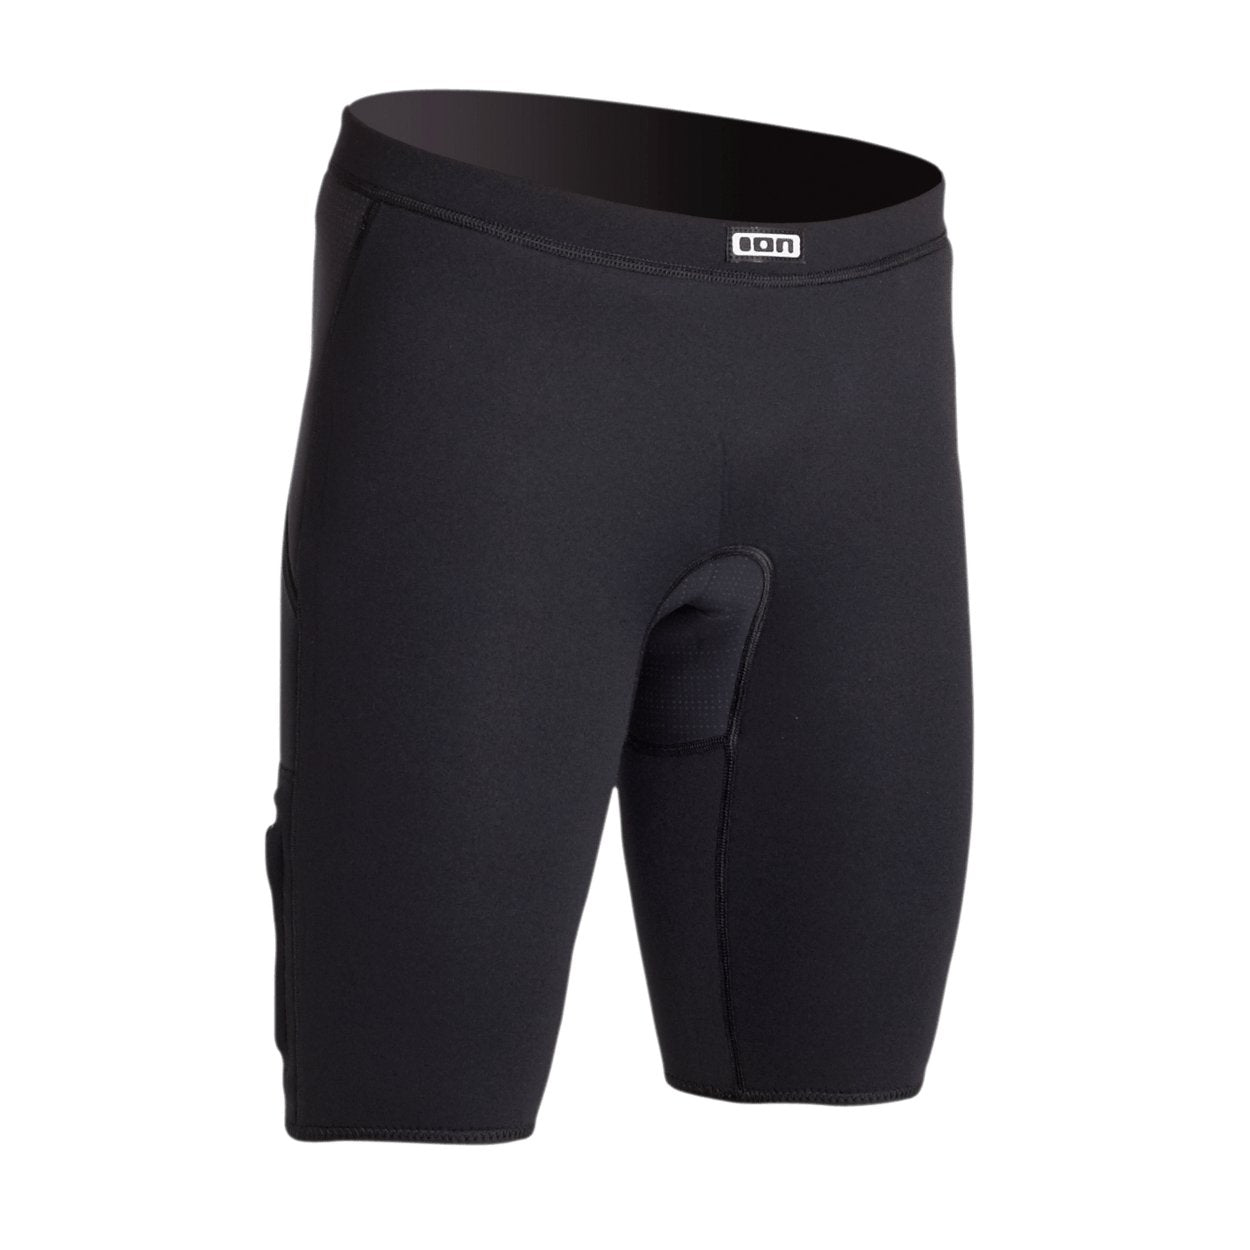 ION Neo Shorts 2.5 men 2022 - Worthing Watersports - 9008415560691 - Tops - ION Water